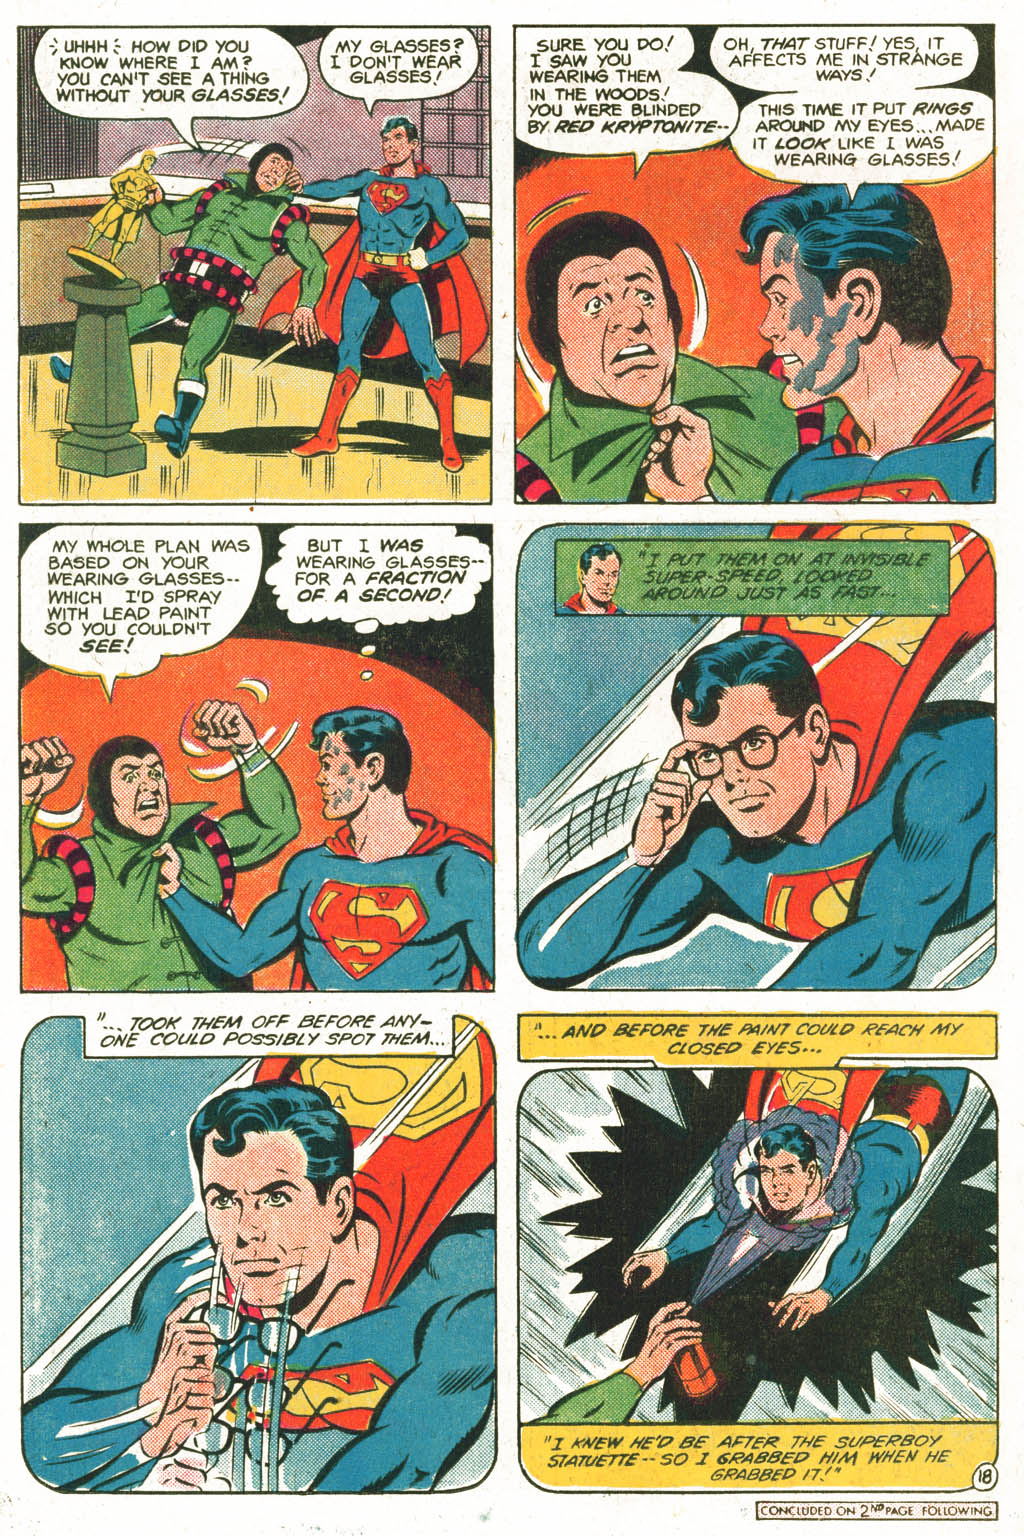 The New Adventures of Superboy 24 Page 18